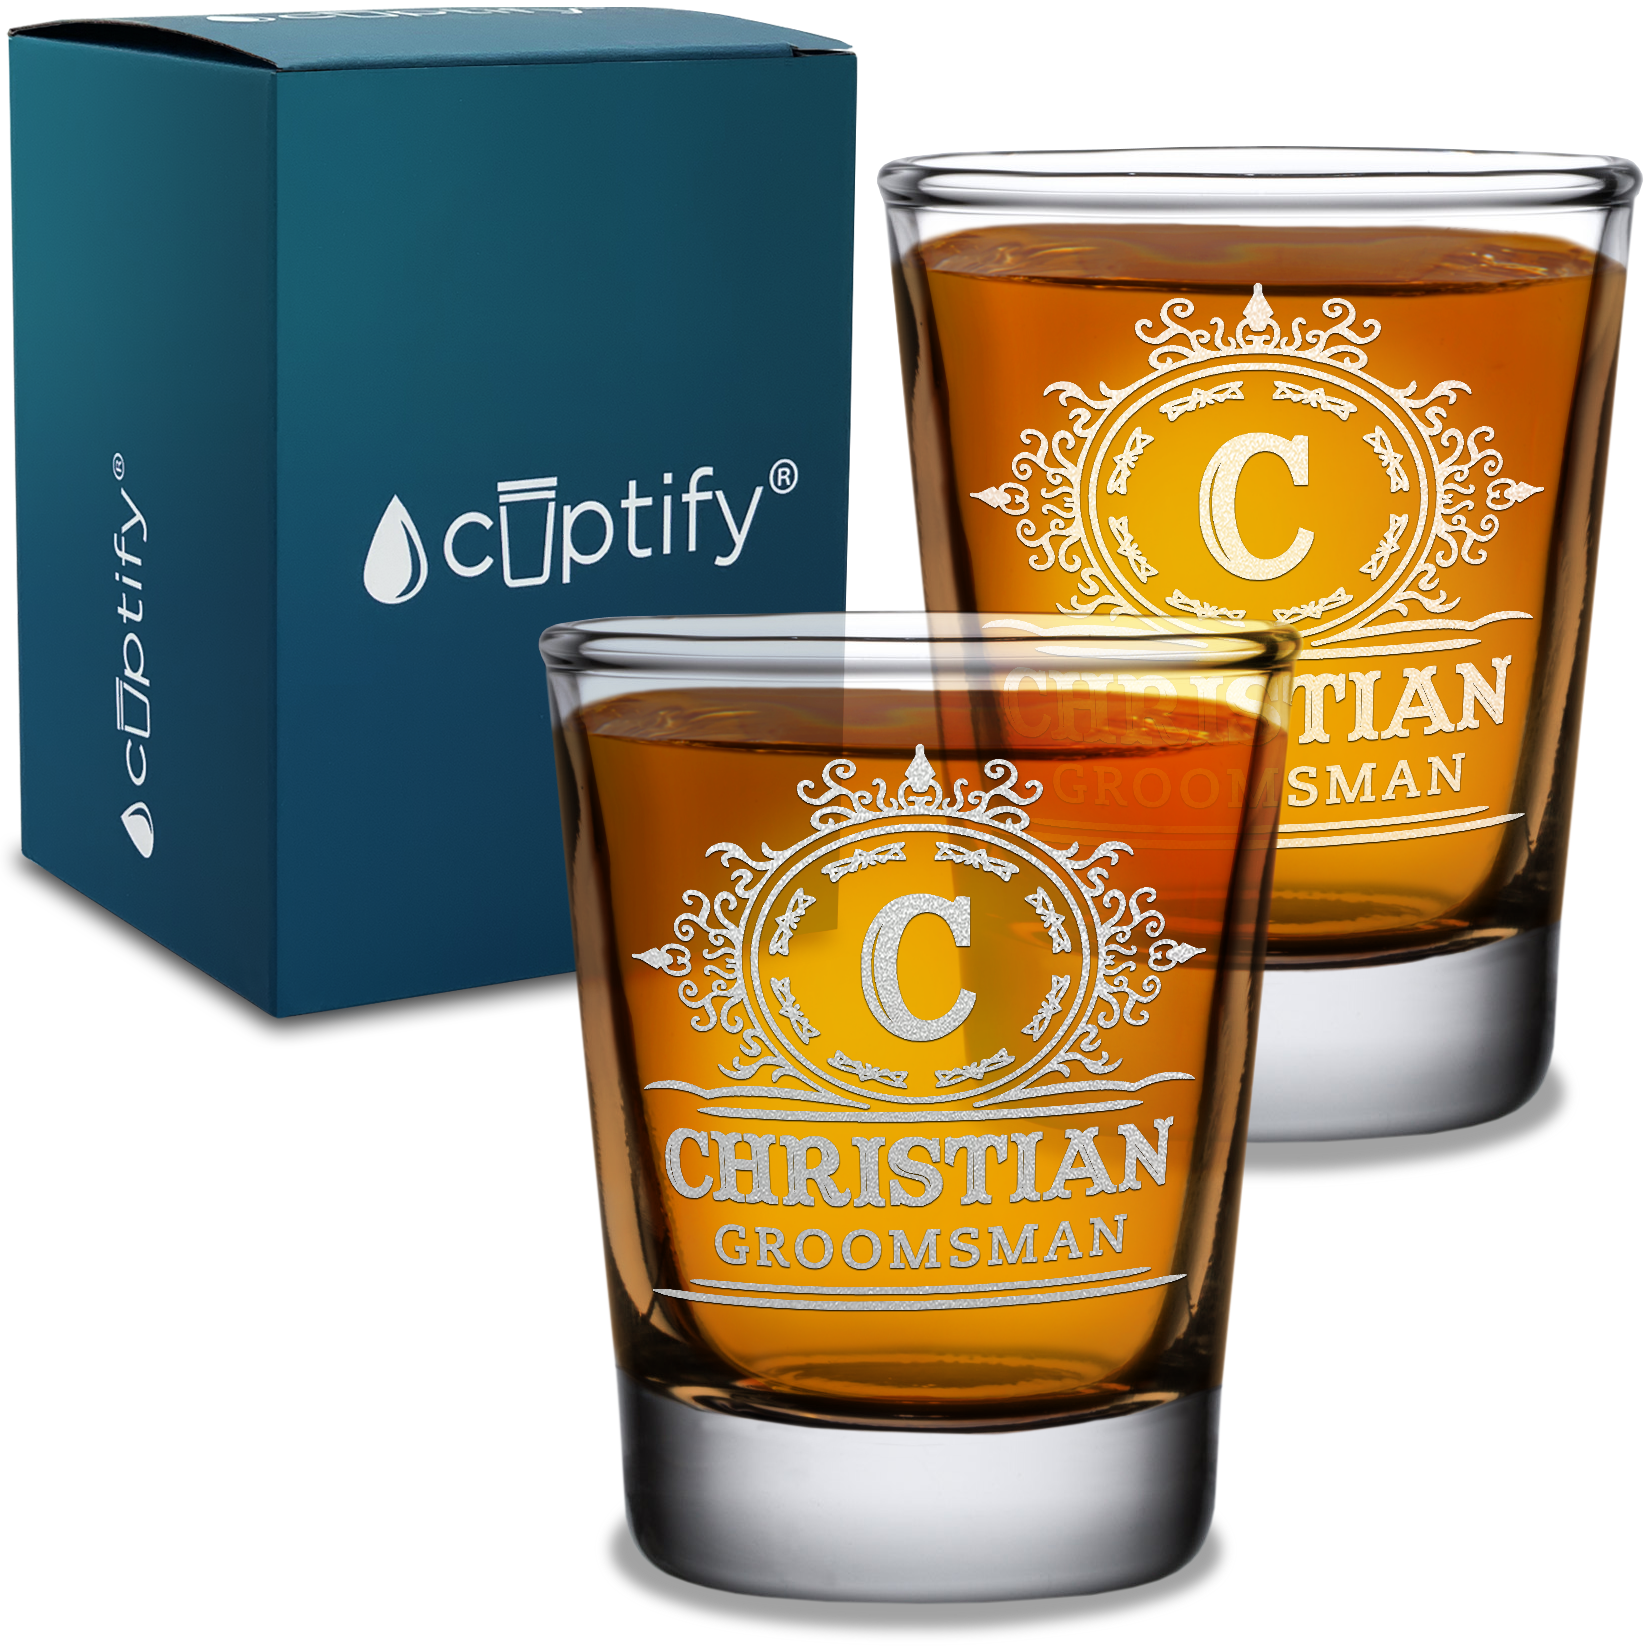  Personalized Groomsman Initial Etched on 2oz Shot Glasses - Set of 2